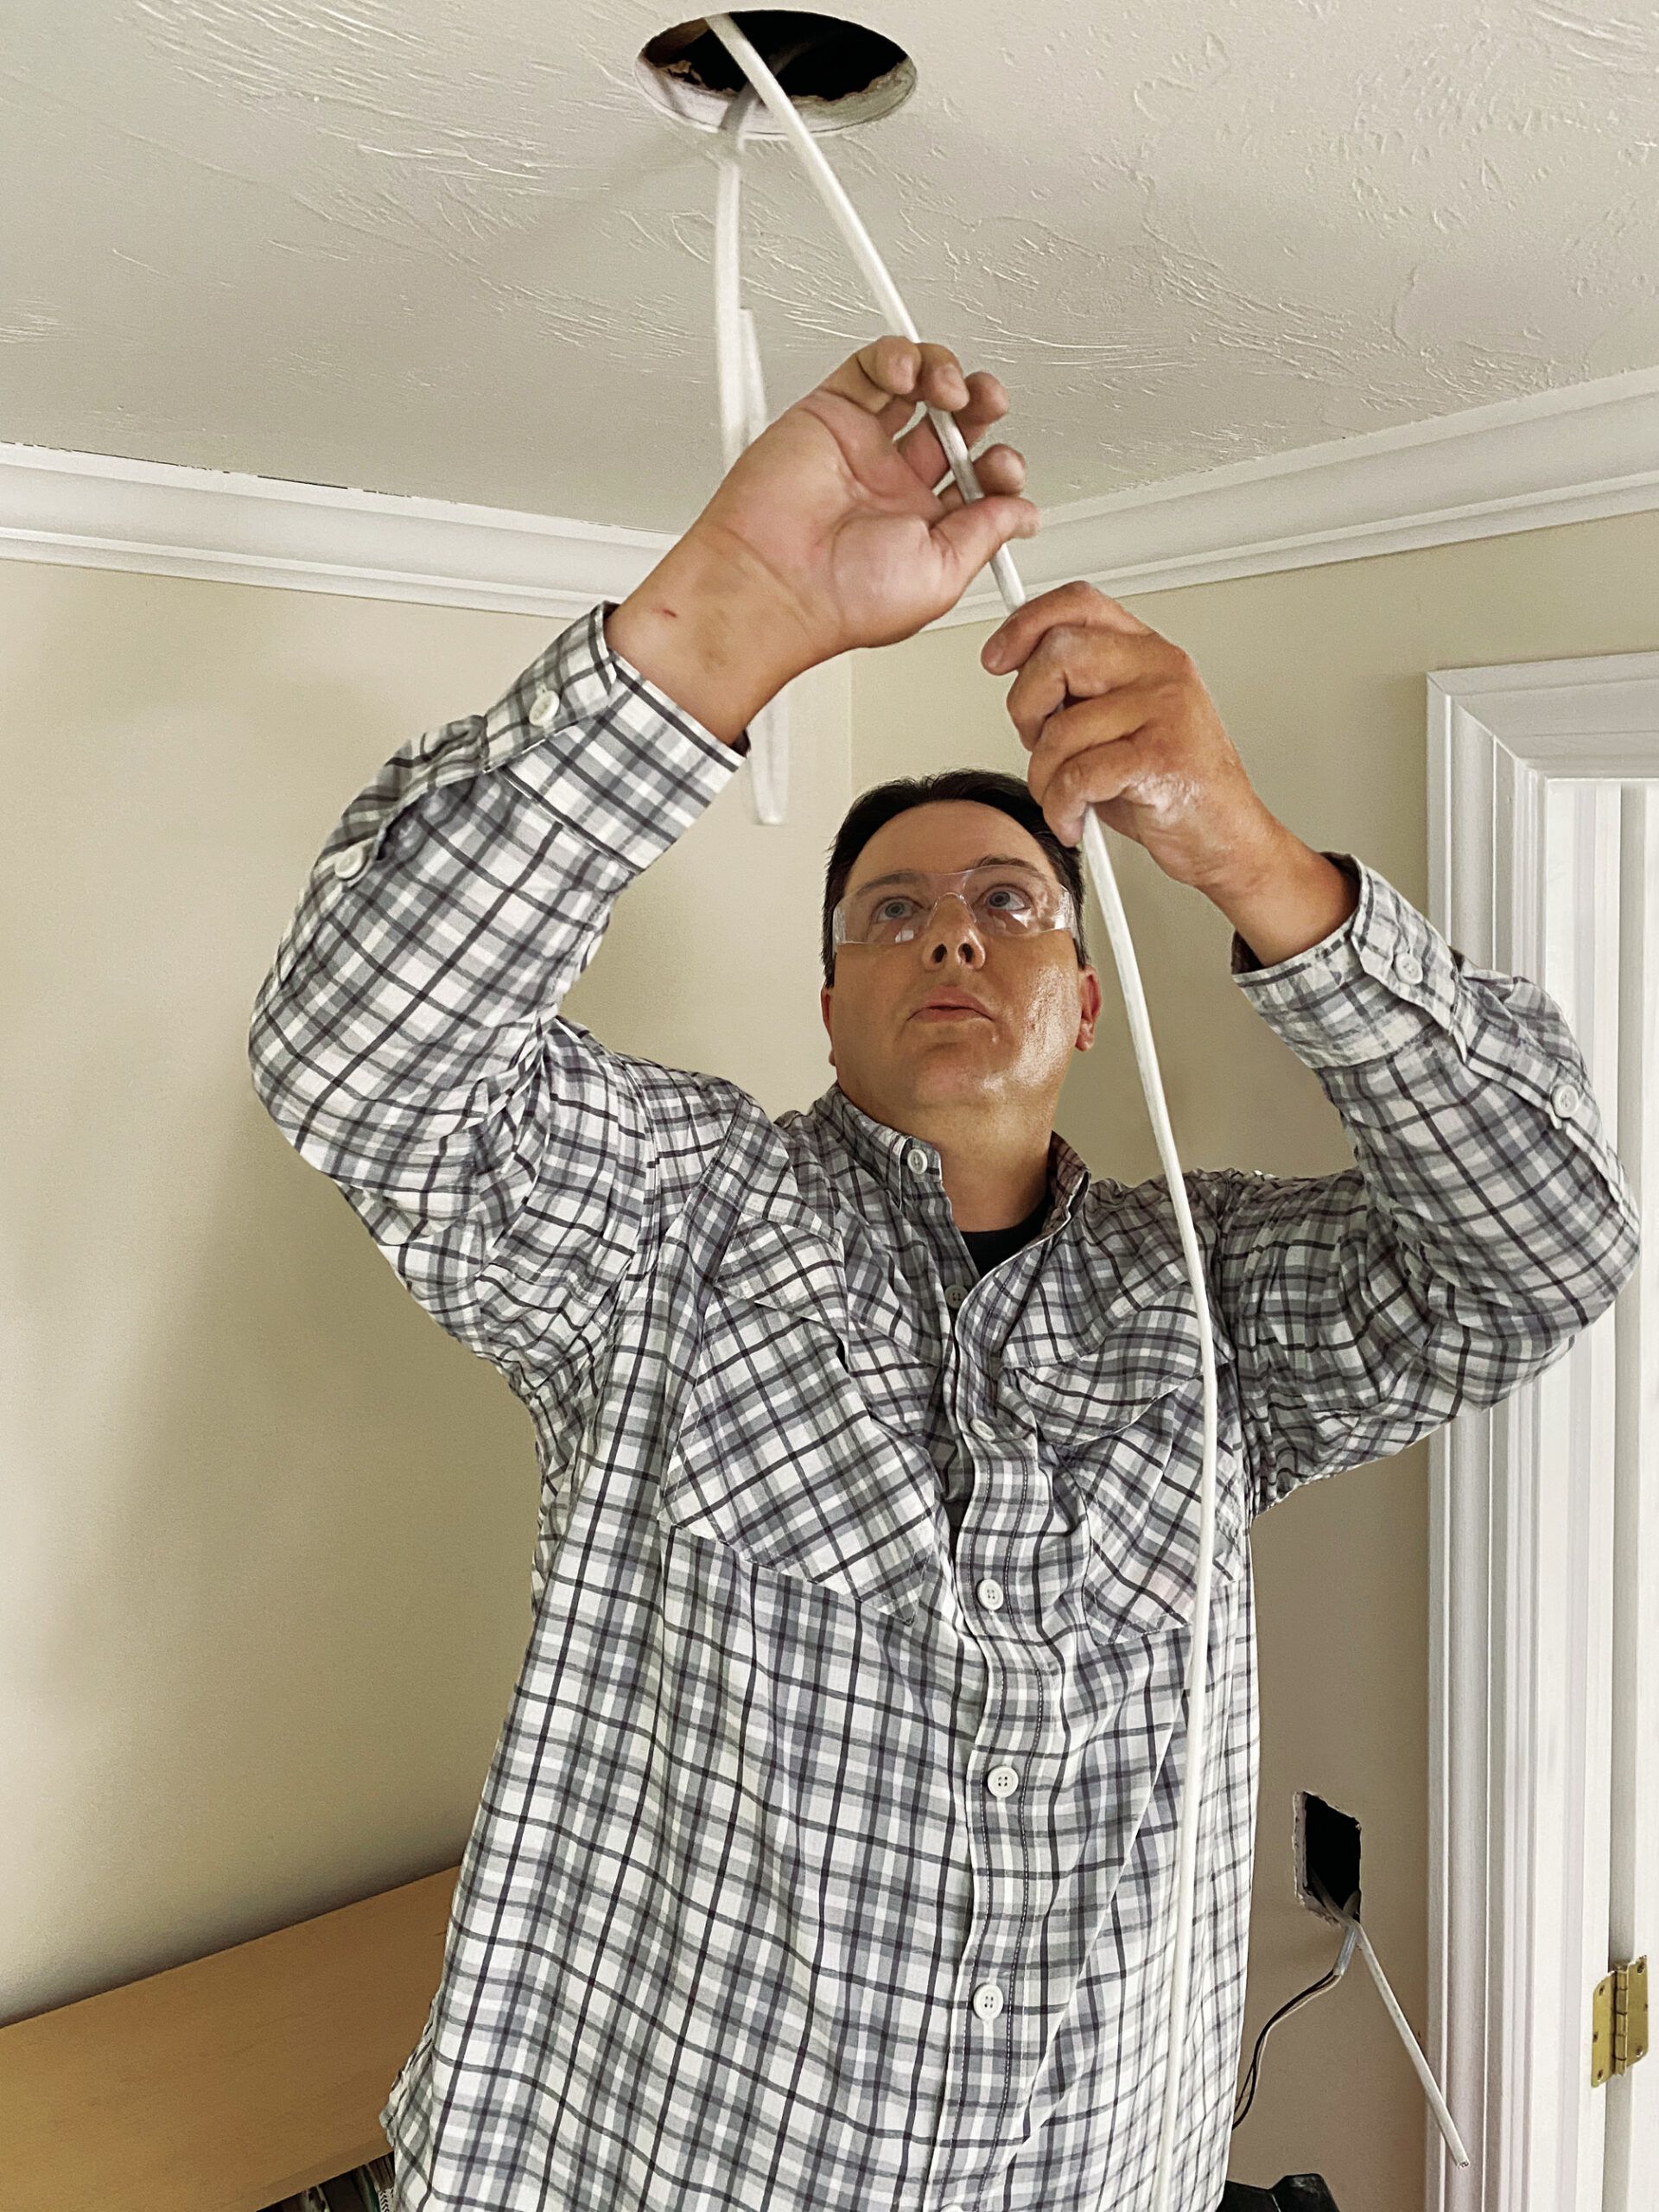 How To Install Recessed Lights This